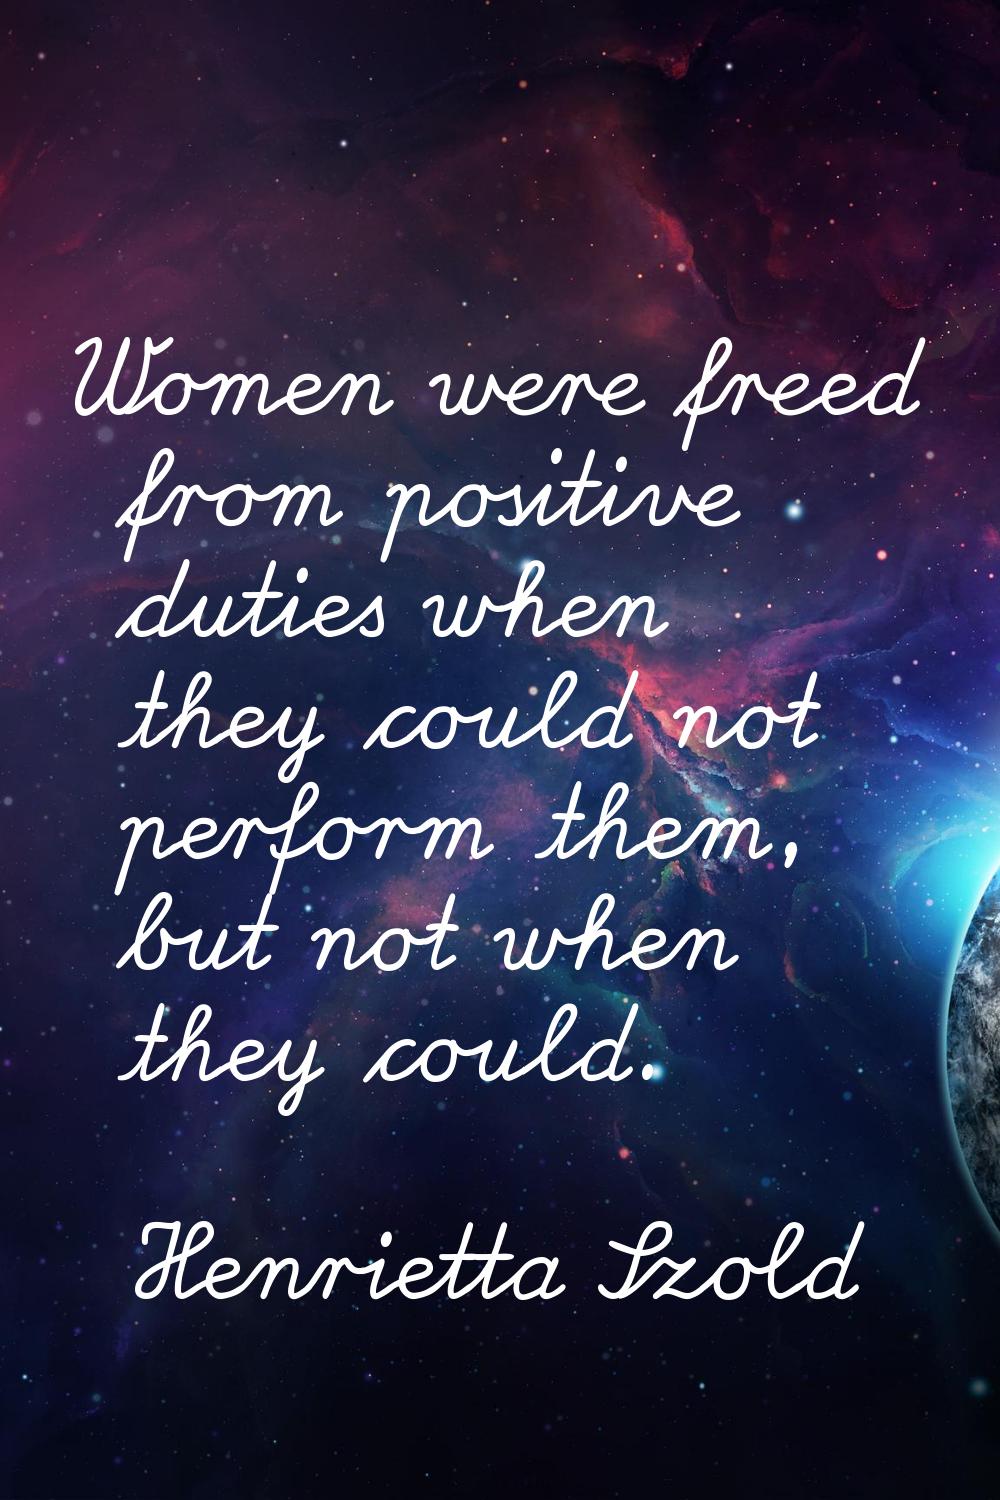 Women were freed from positive duties when they could not perform them, but not when they could.